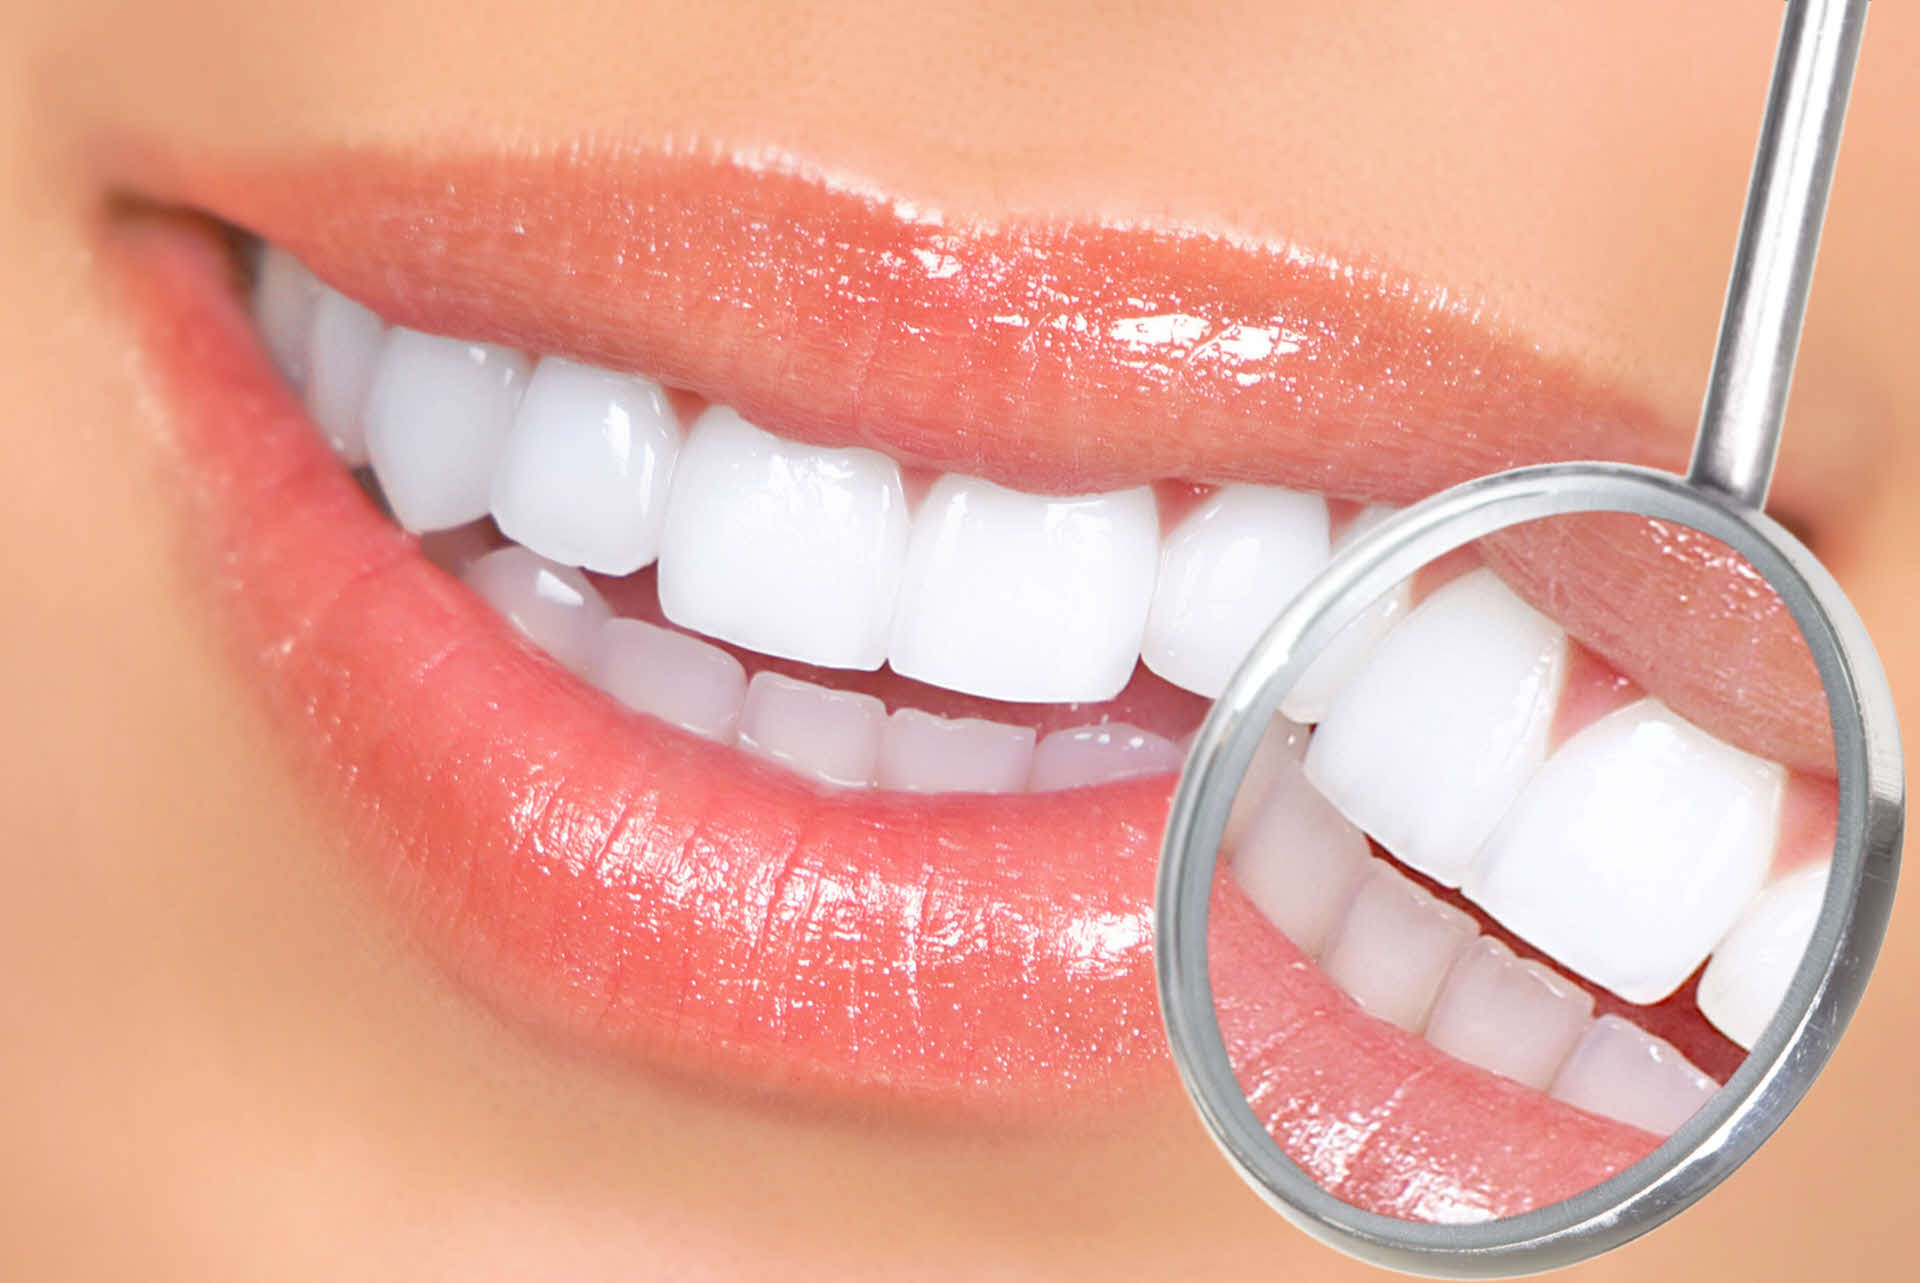 We're dentists in Boise & Eagle who provide complete cosmetic dentistry including invisalign, veneers & teeth whitening.